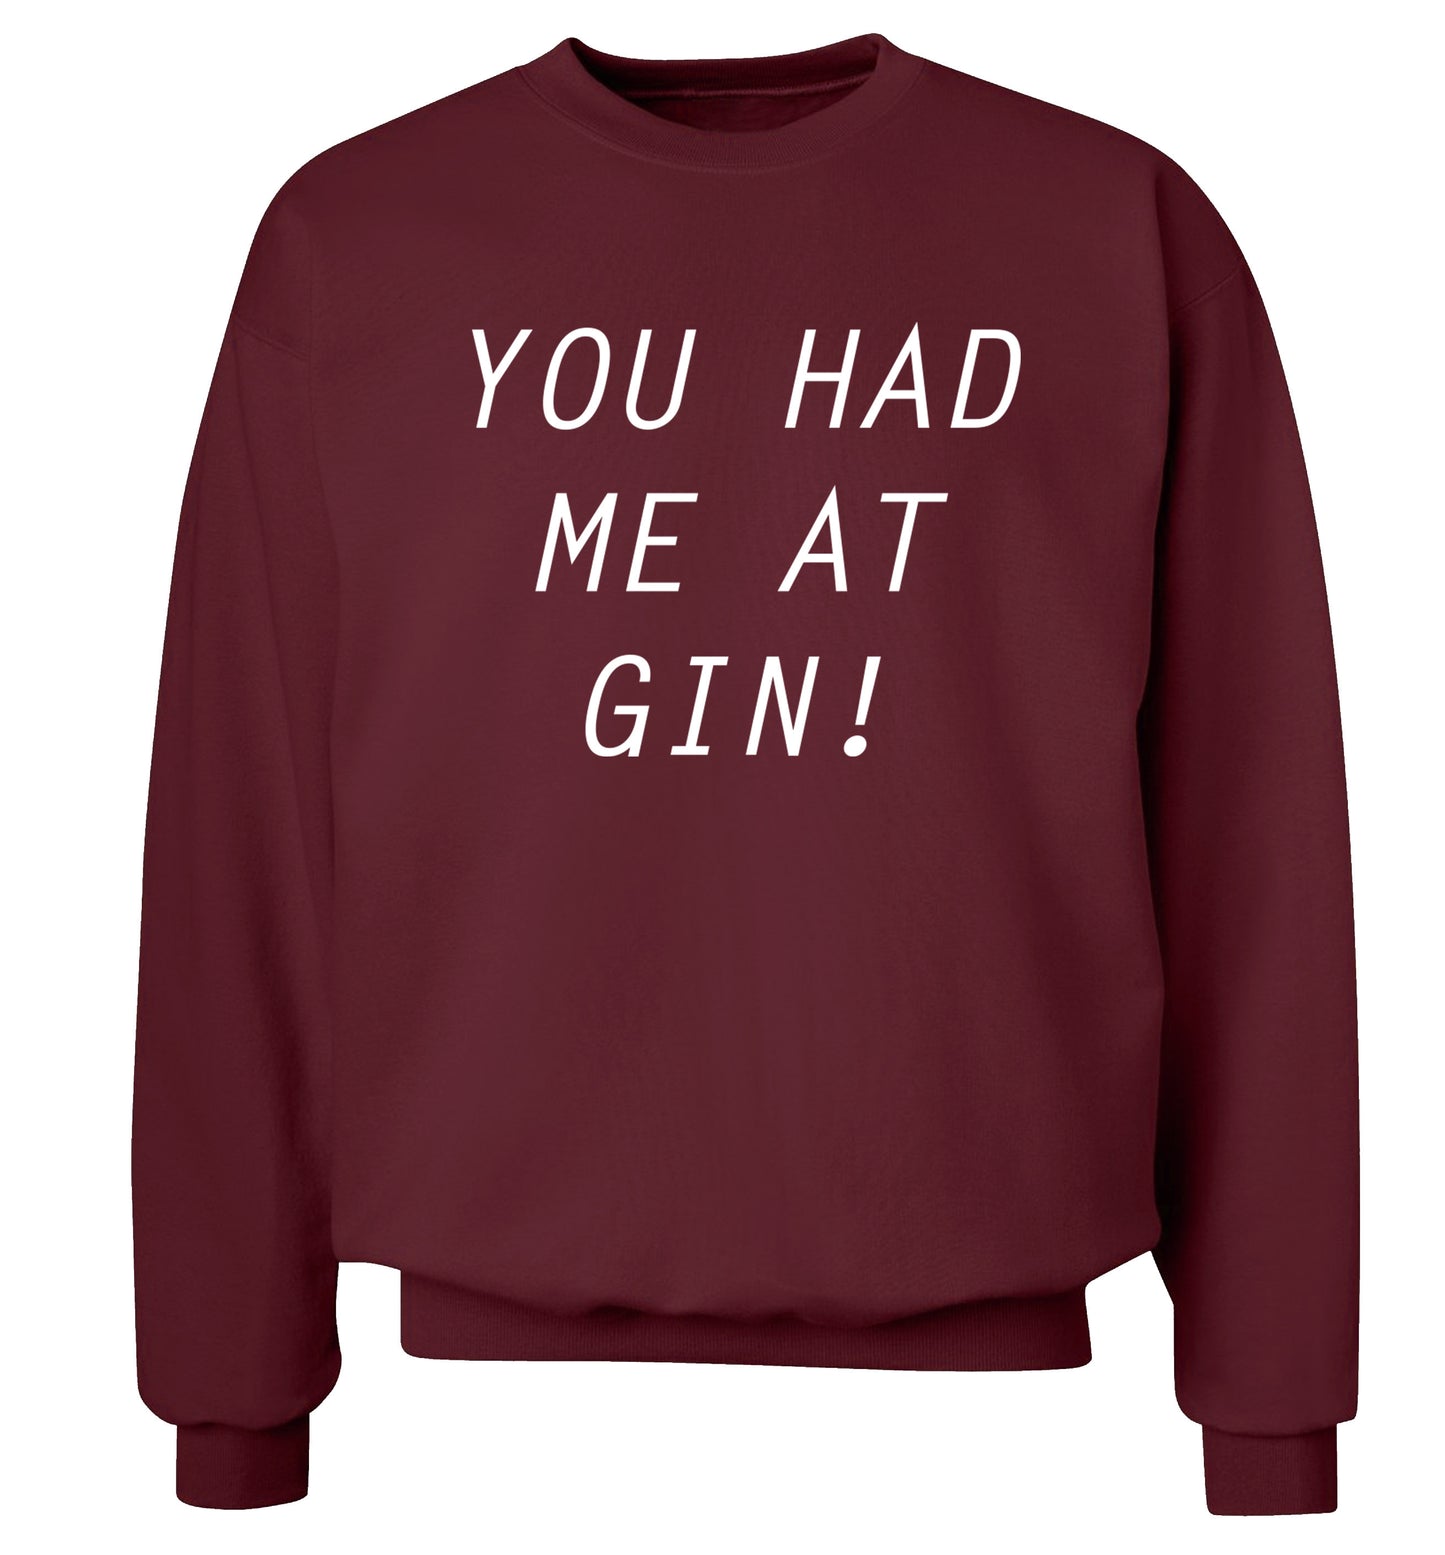 You had me at gin Adult's unisex maroon Sweater 2XL